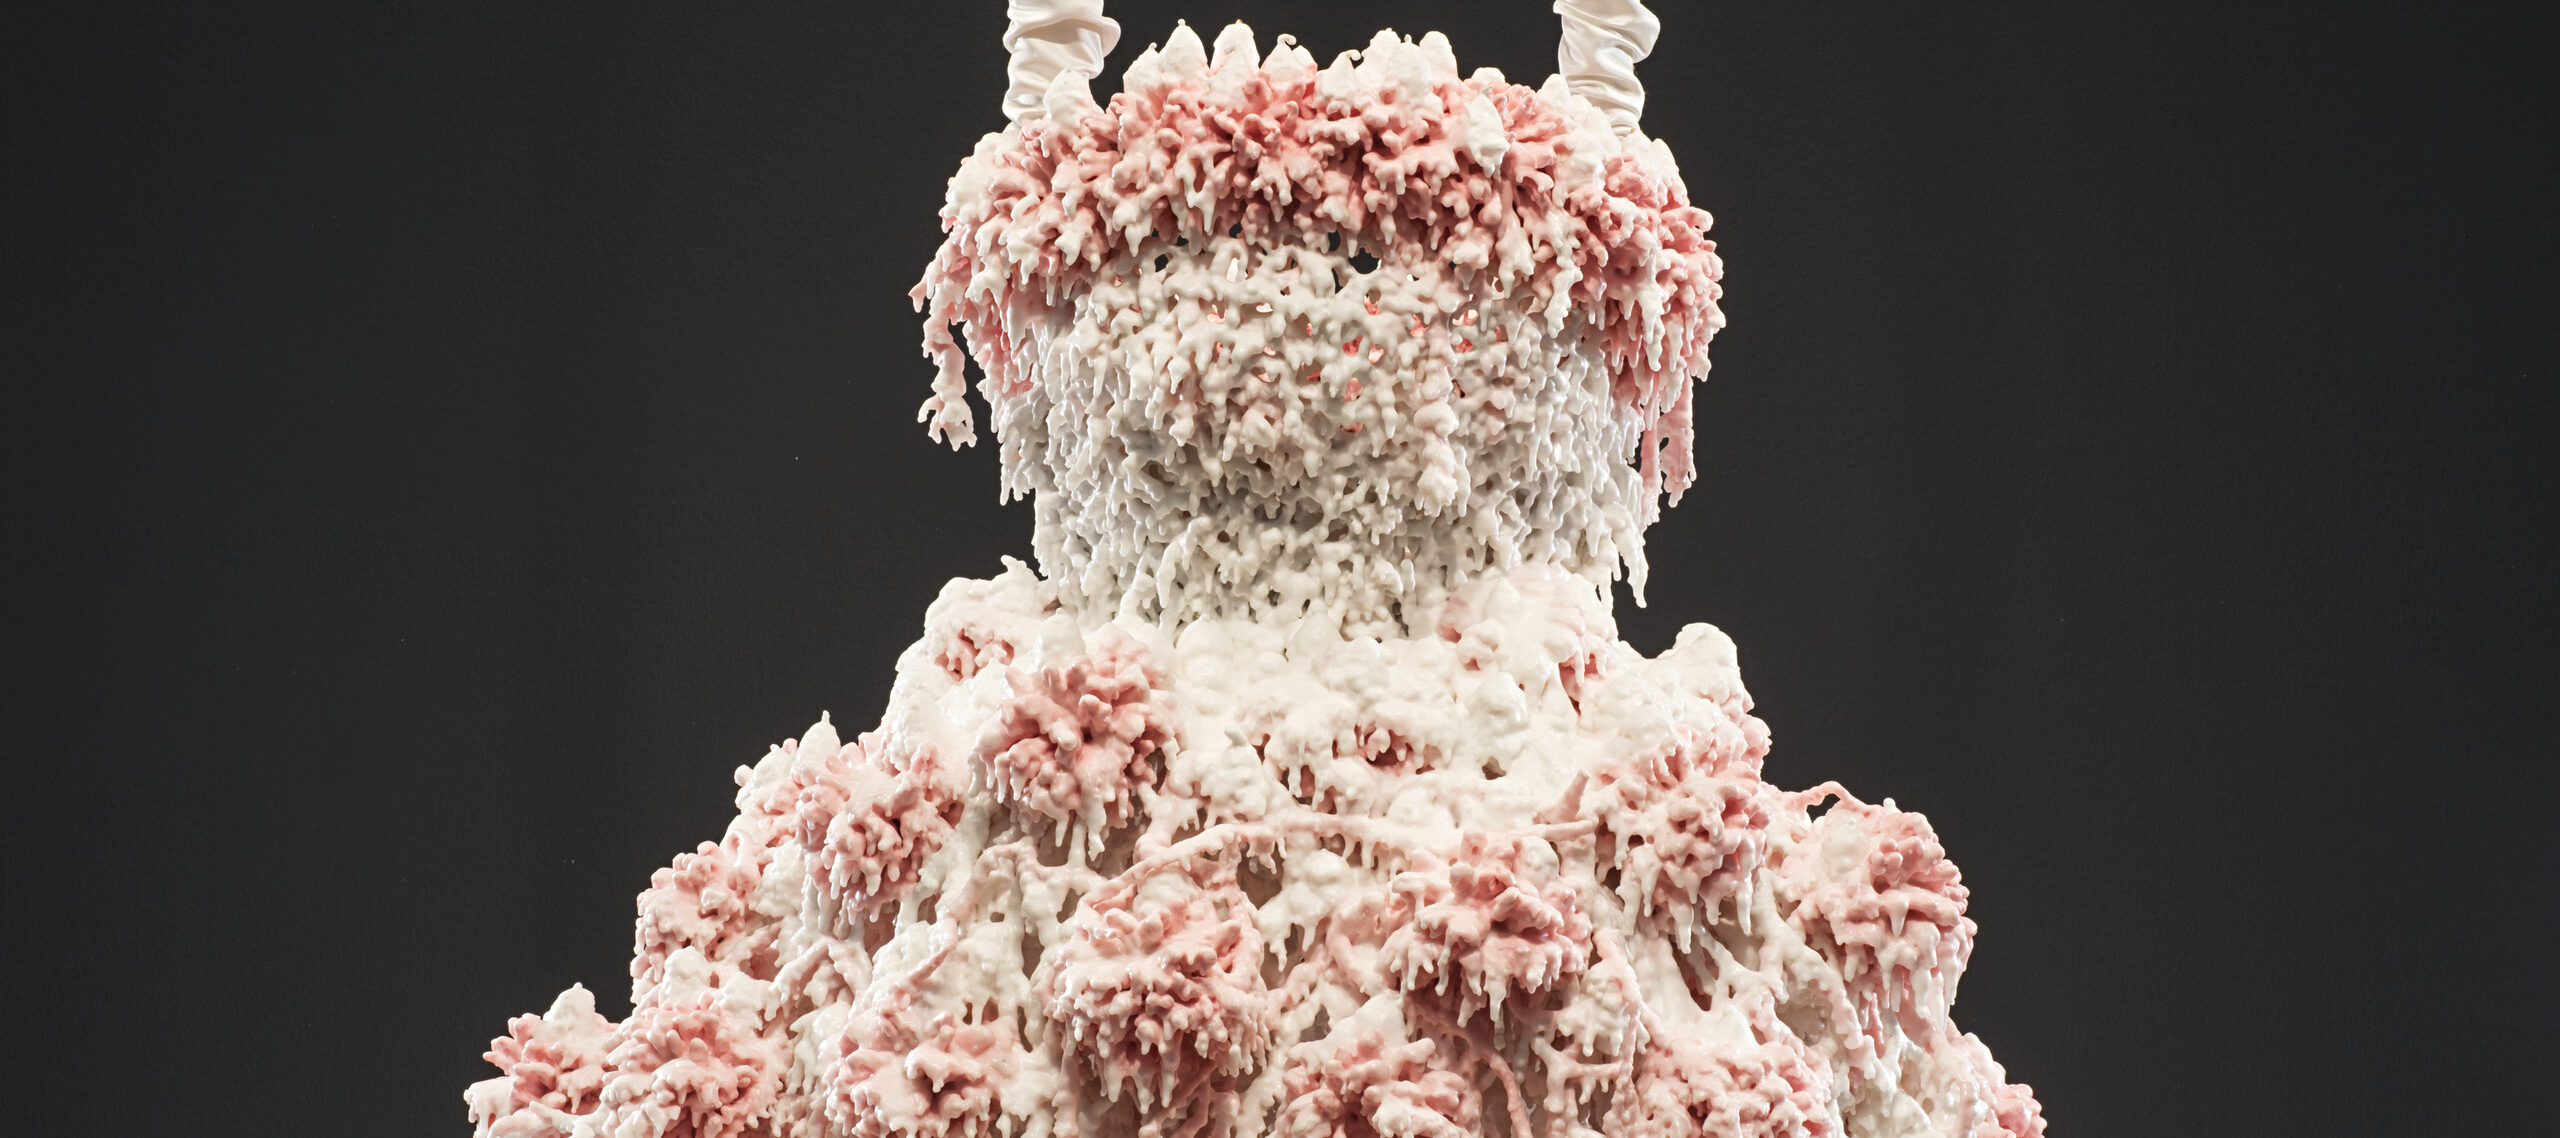 Myriad layers of melted pink and white wax encrust and obscure the metal armature for this abstract sculpture, which hangs from satin-wrapped chains. Its color and shape, as well as the bumpy, lacy texture, evoke a frilly tutu, lavishly frosted wedding cake, or coral accretions.